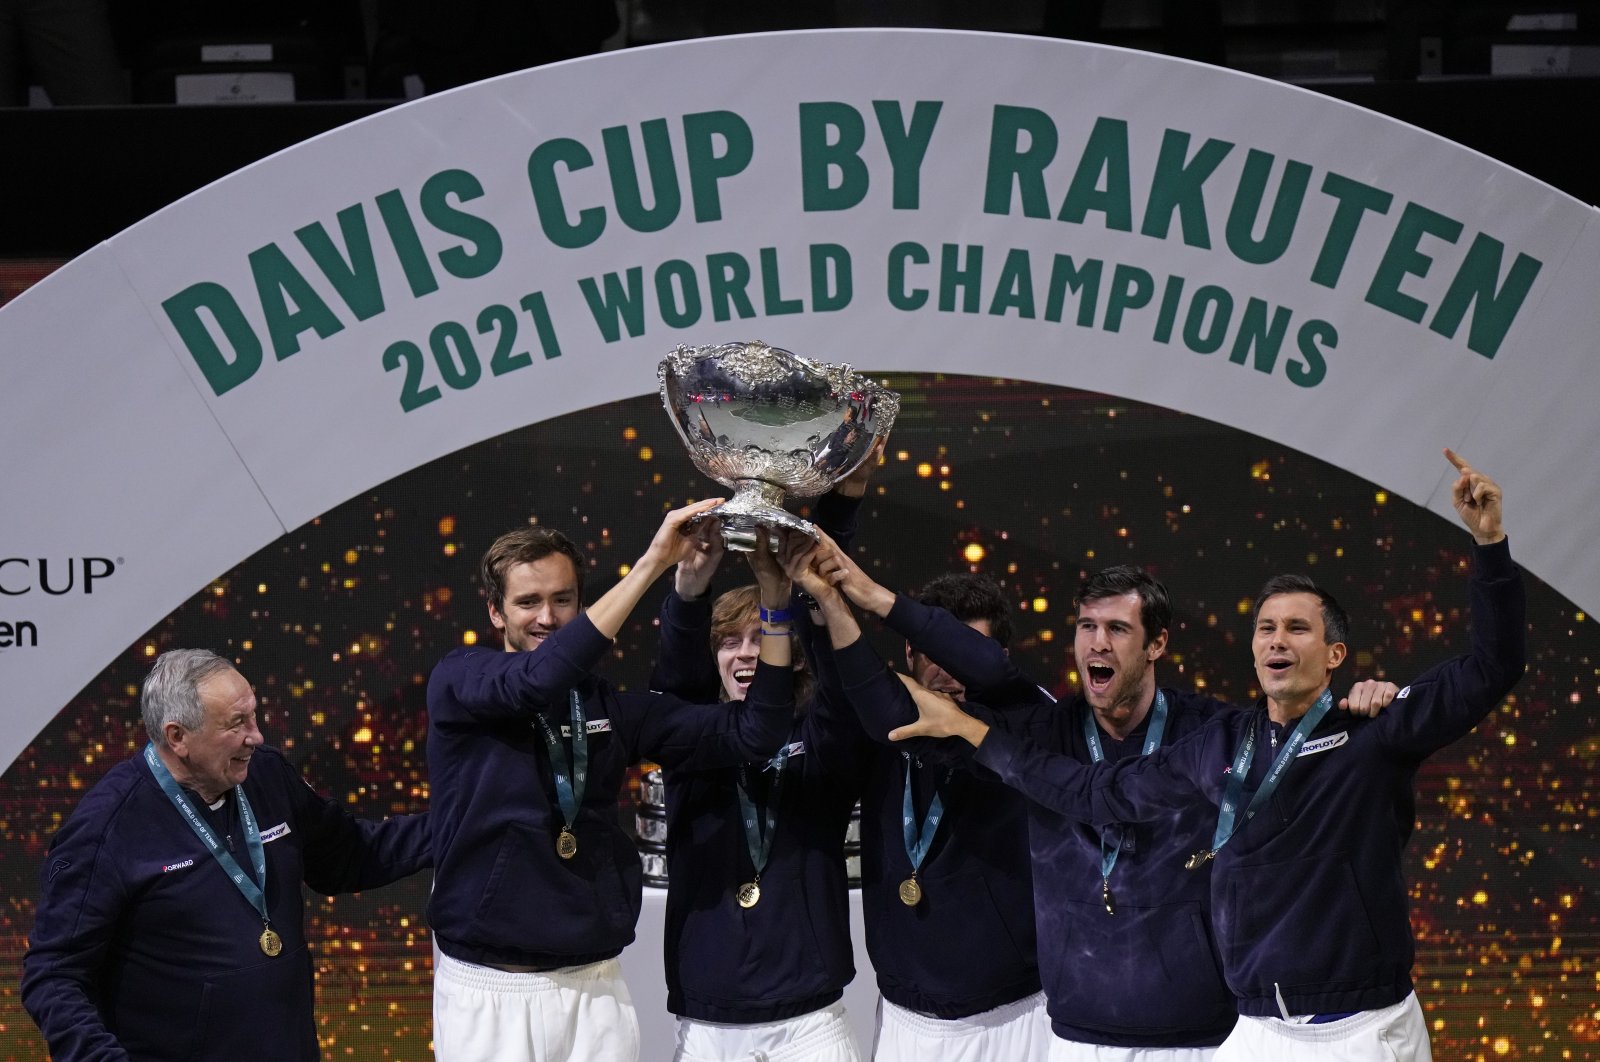 The Russian Tennis Federation team celebrate with the trophy after winning the Davis Cup tennis final at the Madrid Arena in Madrid, Spain, Dec. 5, 2021. (AP Photo)